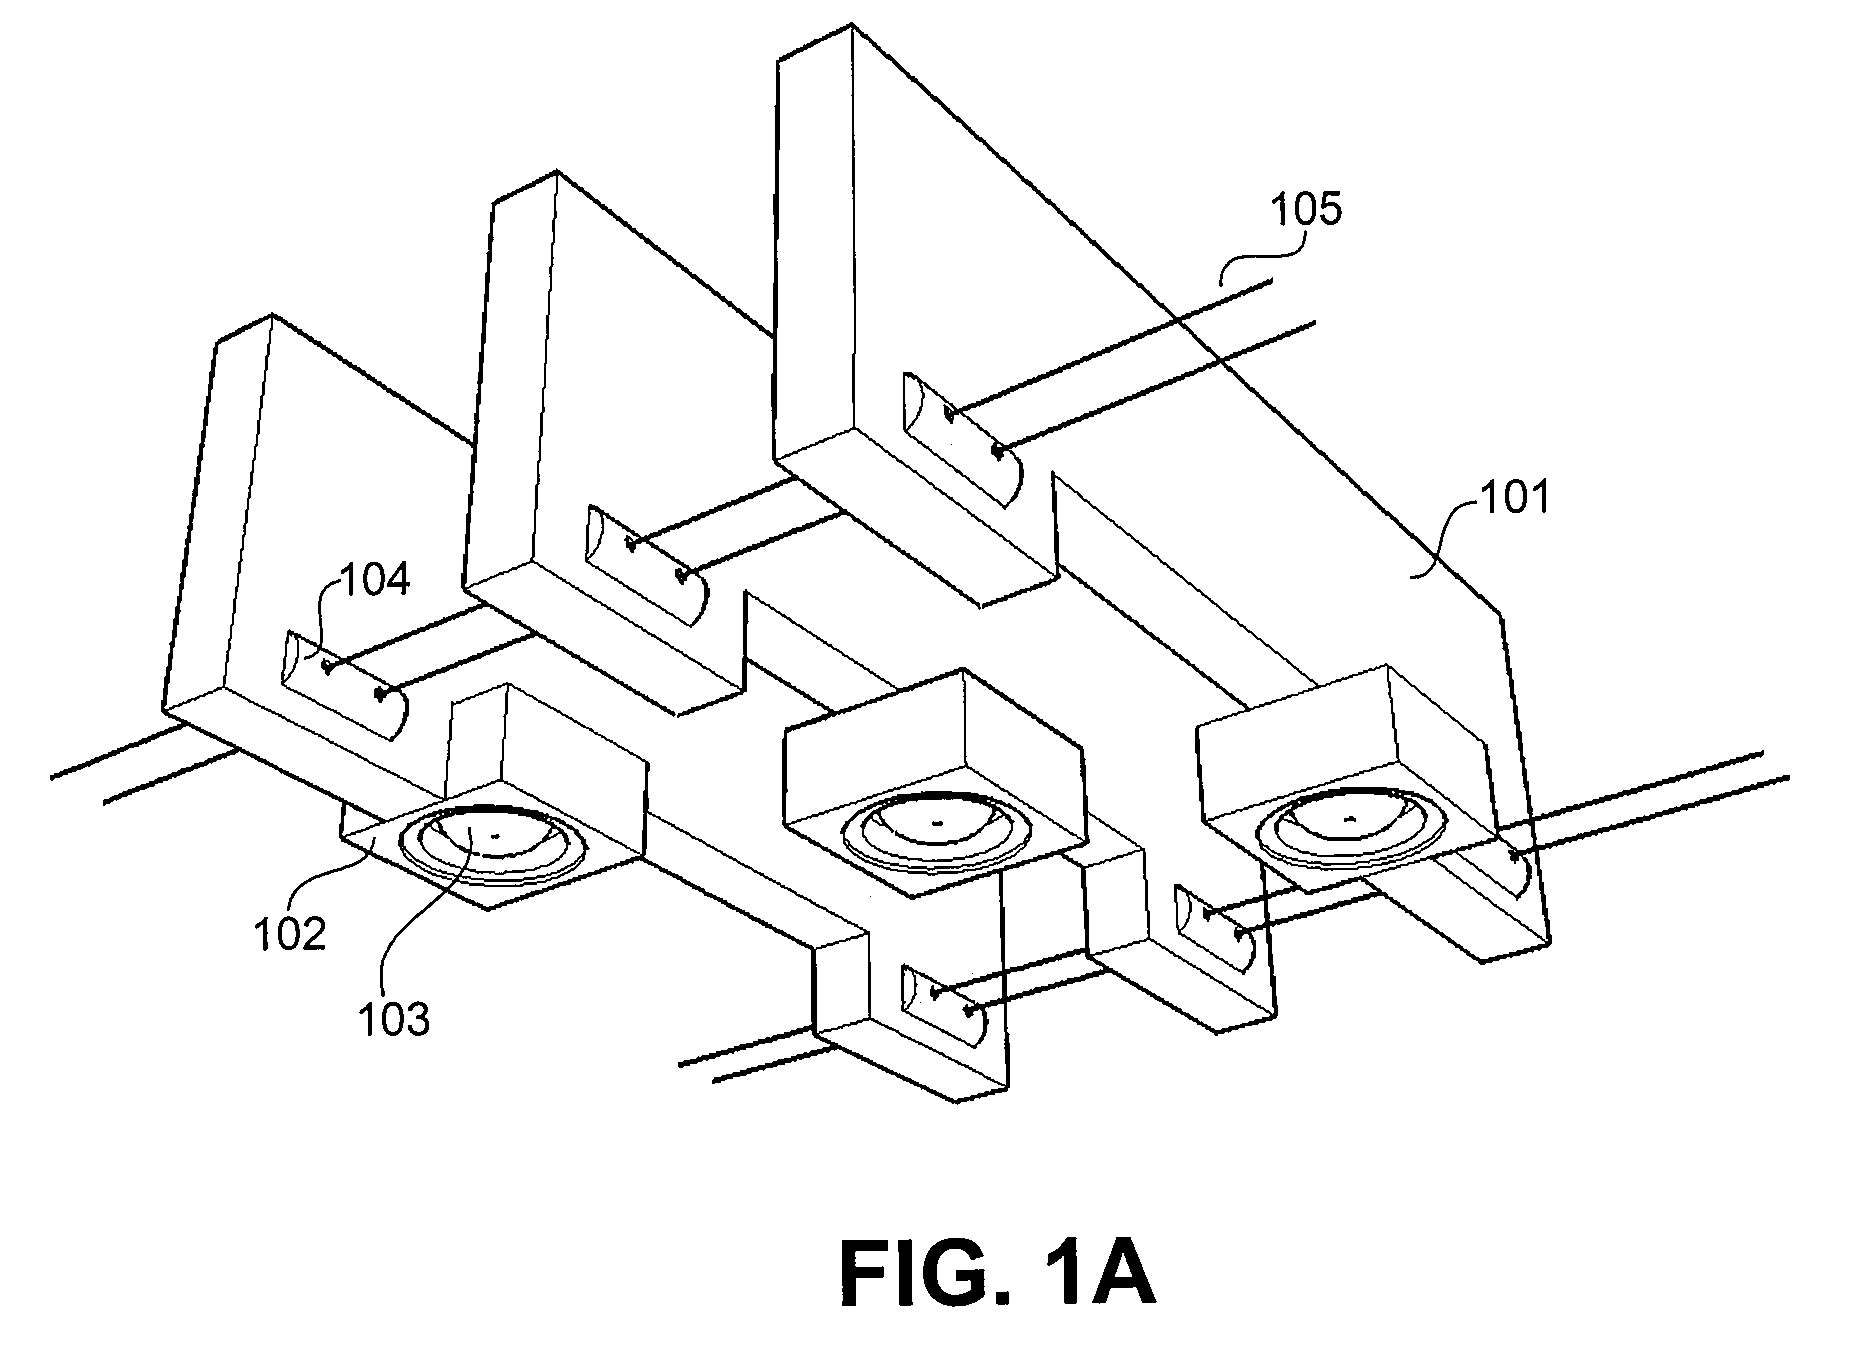 Flexible array probe for the inspection of a contoured surface with varying cross-sectional geometry